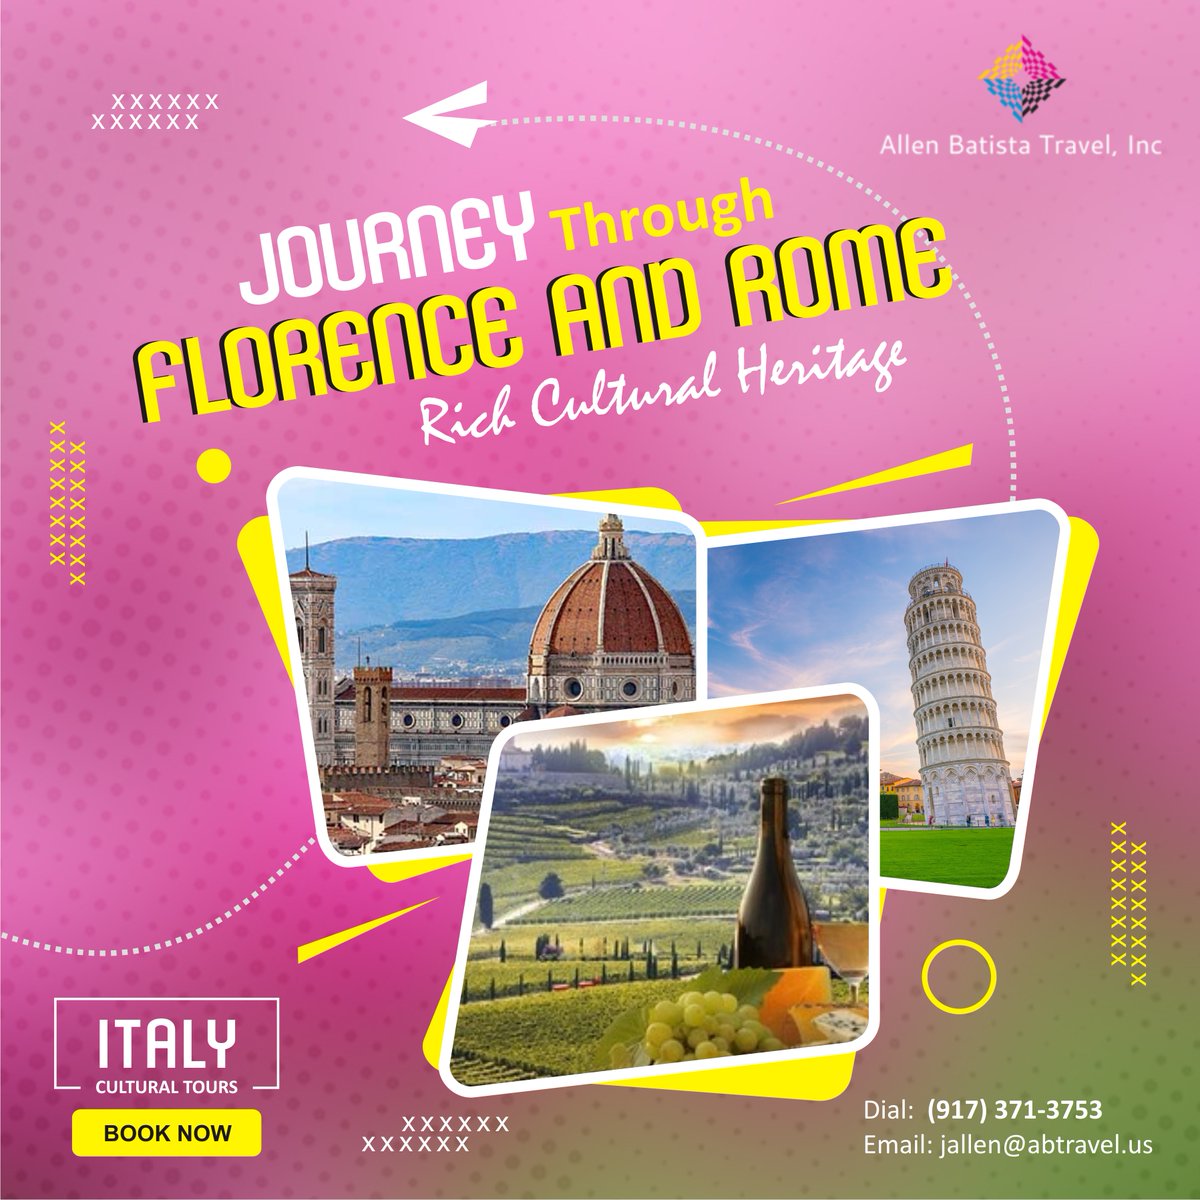 Embark on a journey through Italy's rich cultural heritage with our Tuscany and Rome Cultural Tours Packages. From awe-inspiring ancient ruins to magnificent art collections, experience the best of Italy’s iconic cities.
rb.gy/cok3d
#ItalyCulturalTours #ArtandHistory